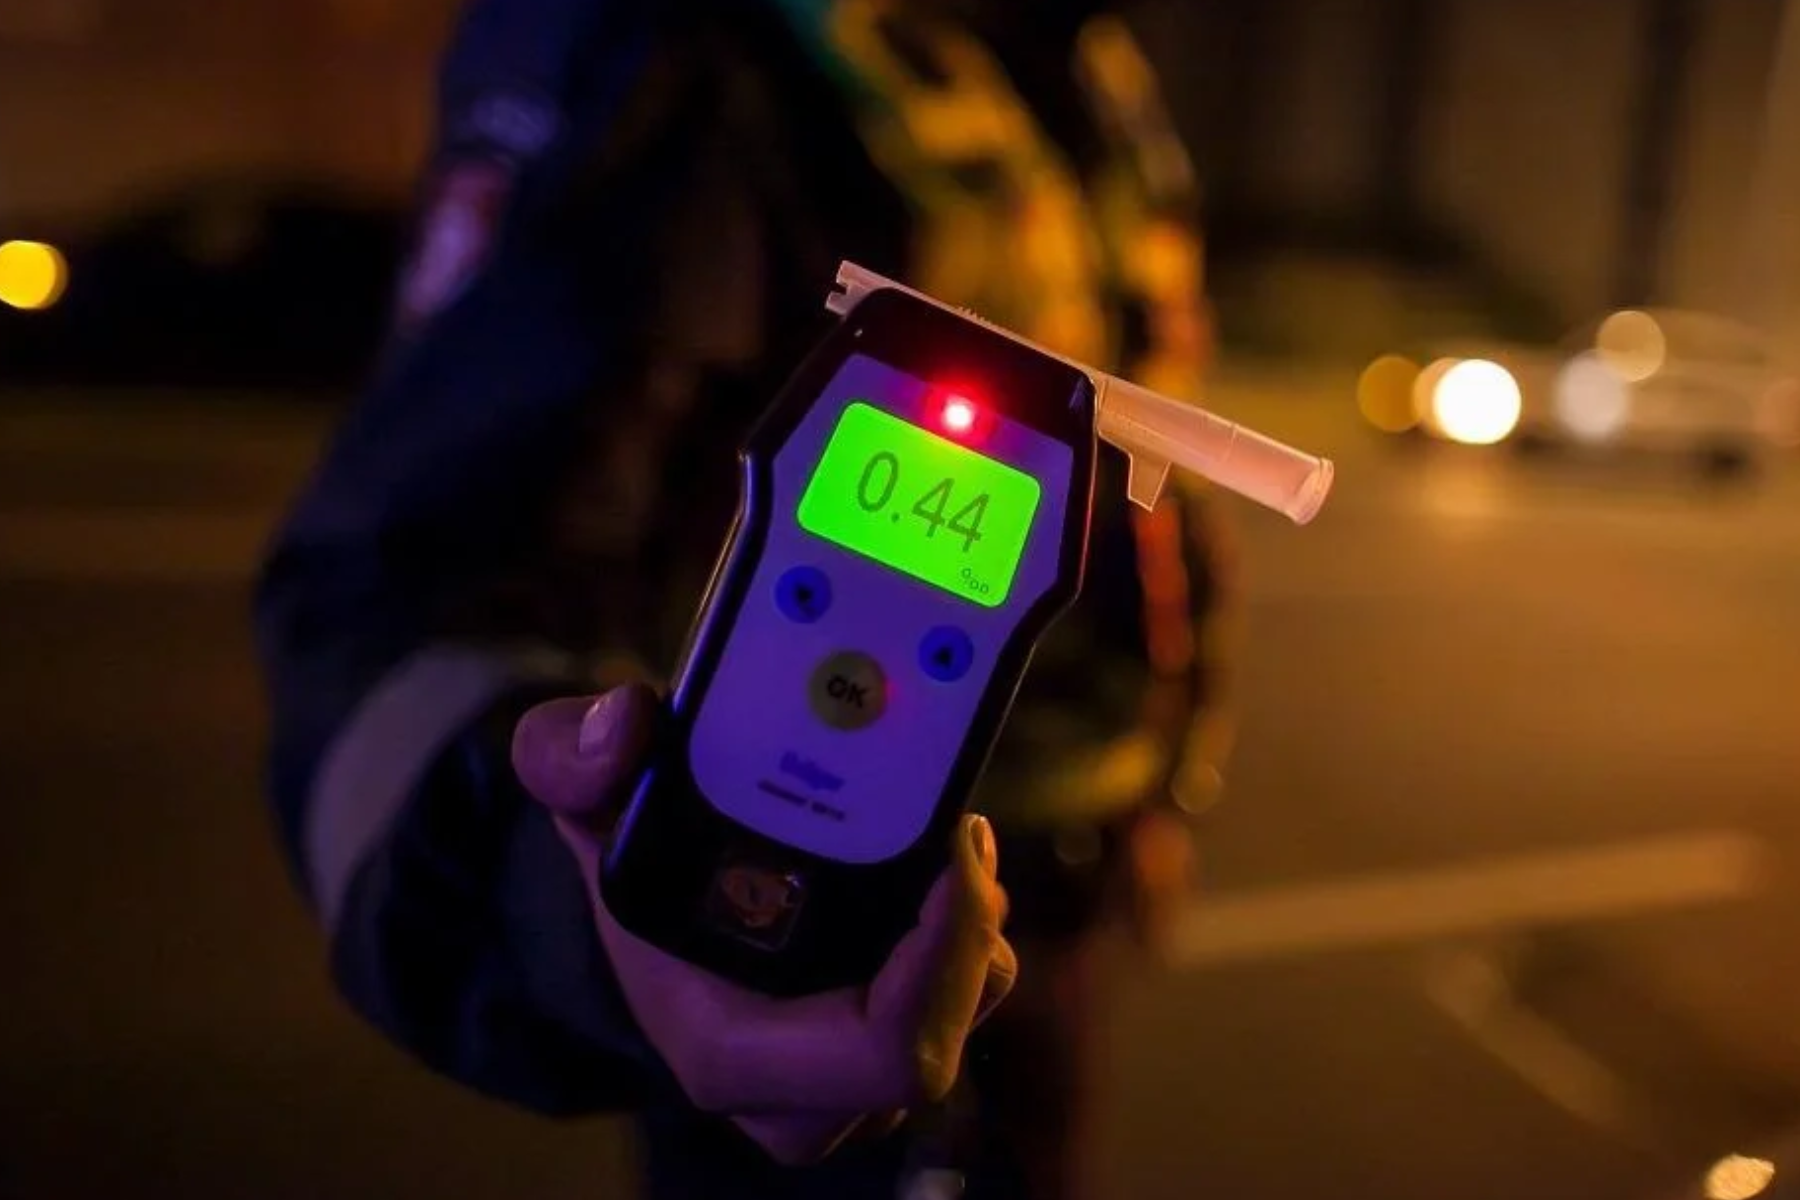 A police officer carrying a breathalyzer in the street